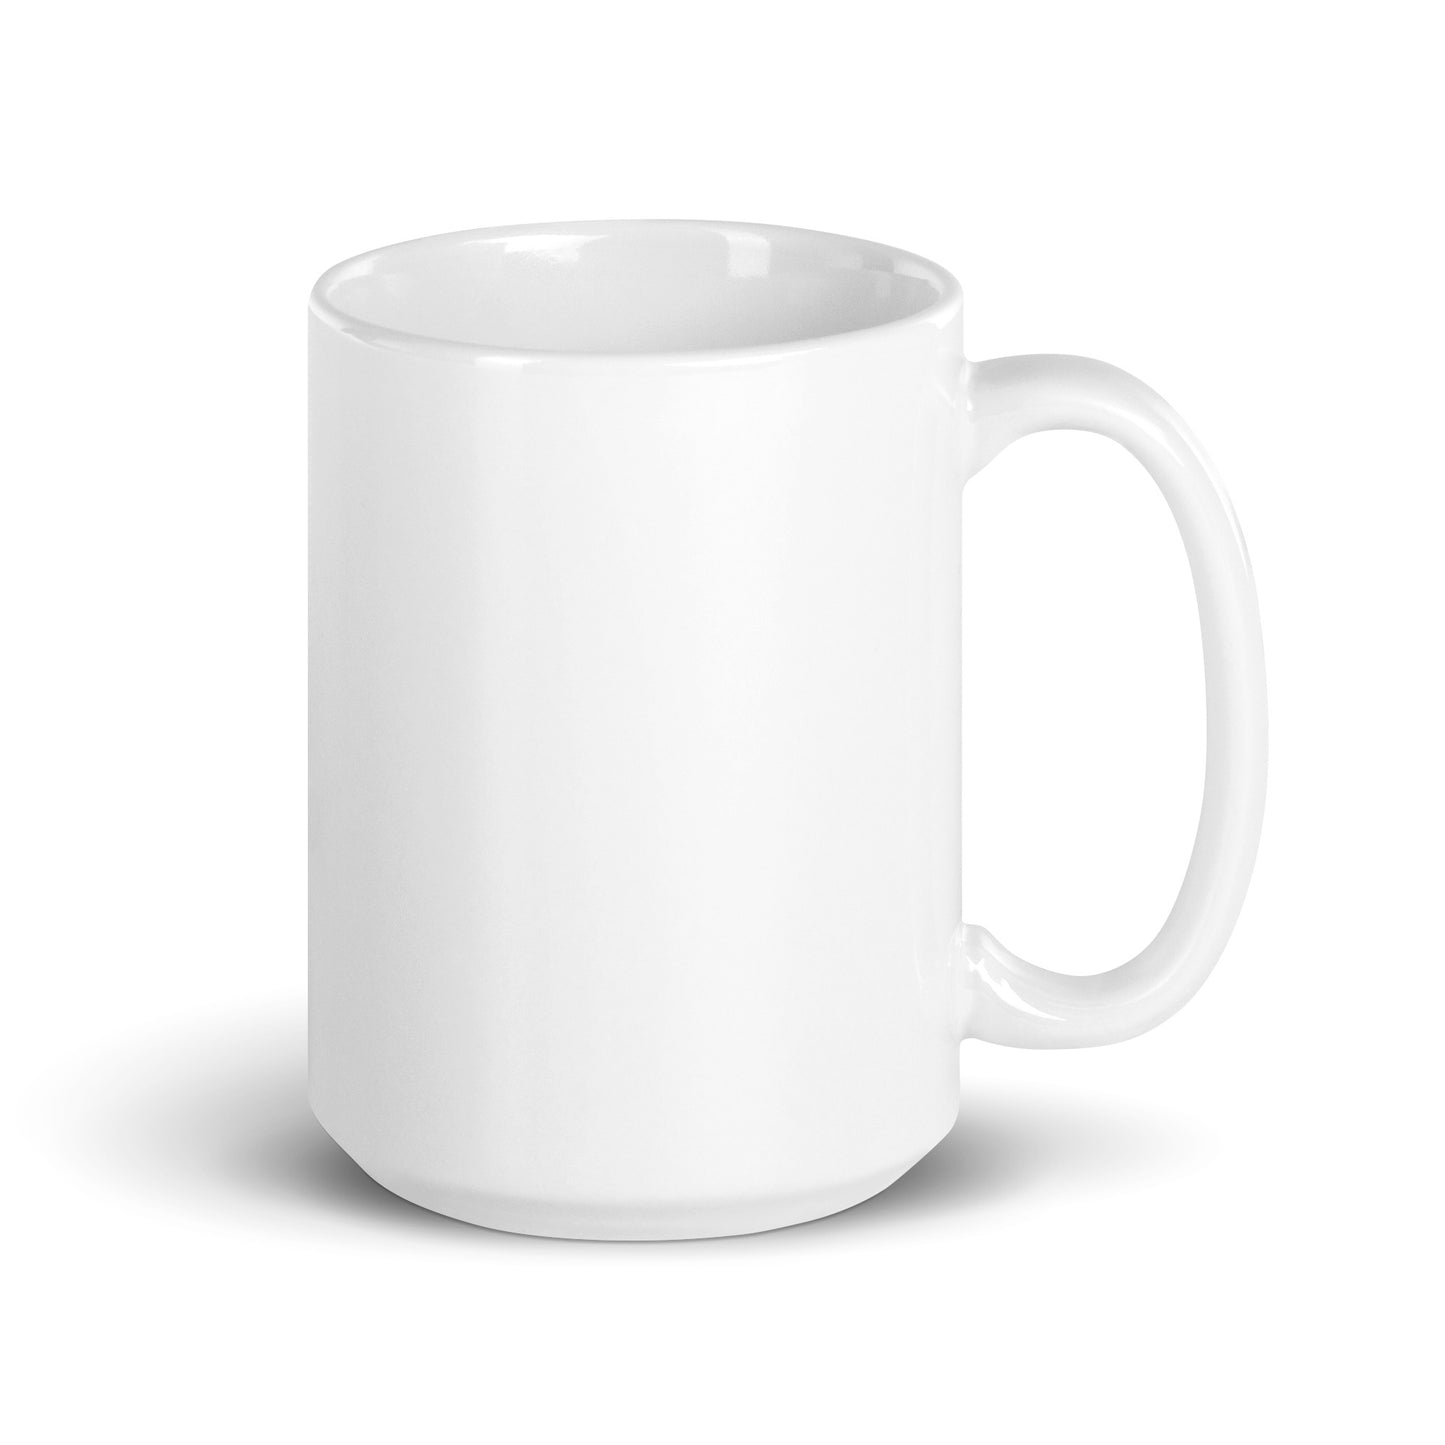 CSS (Constant State of Suffering) mug